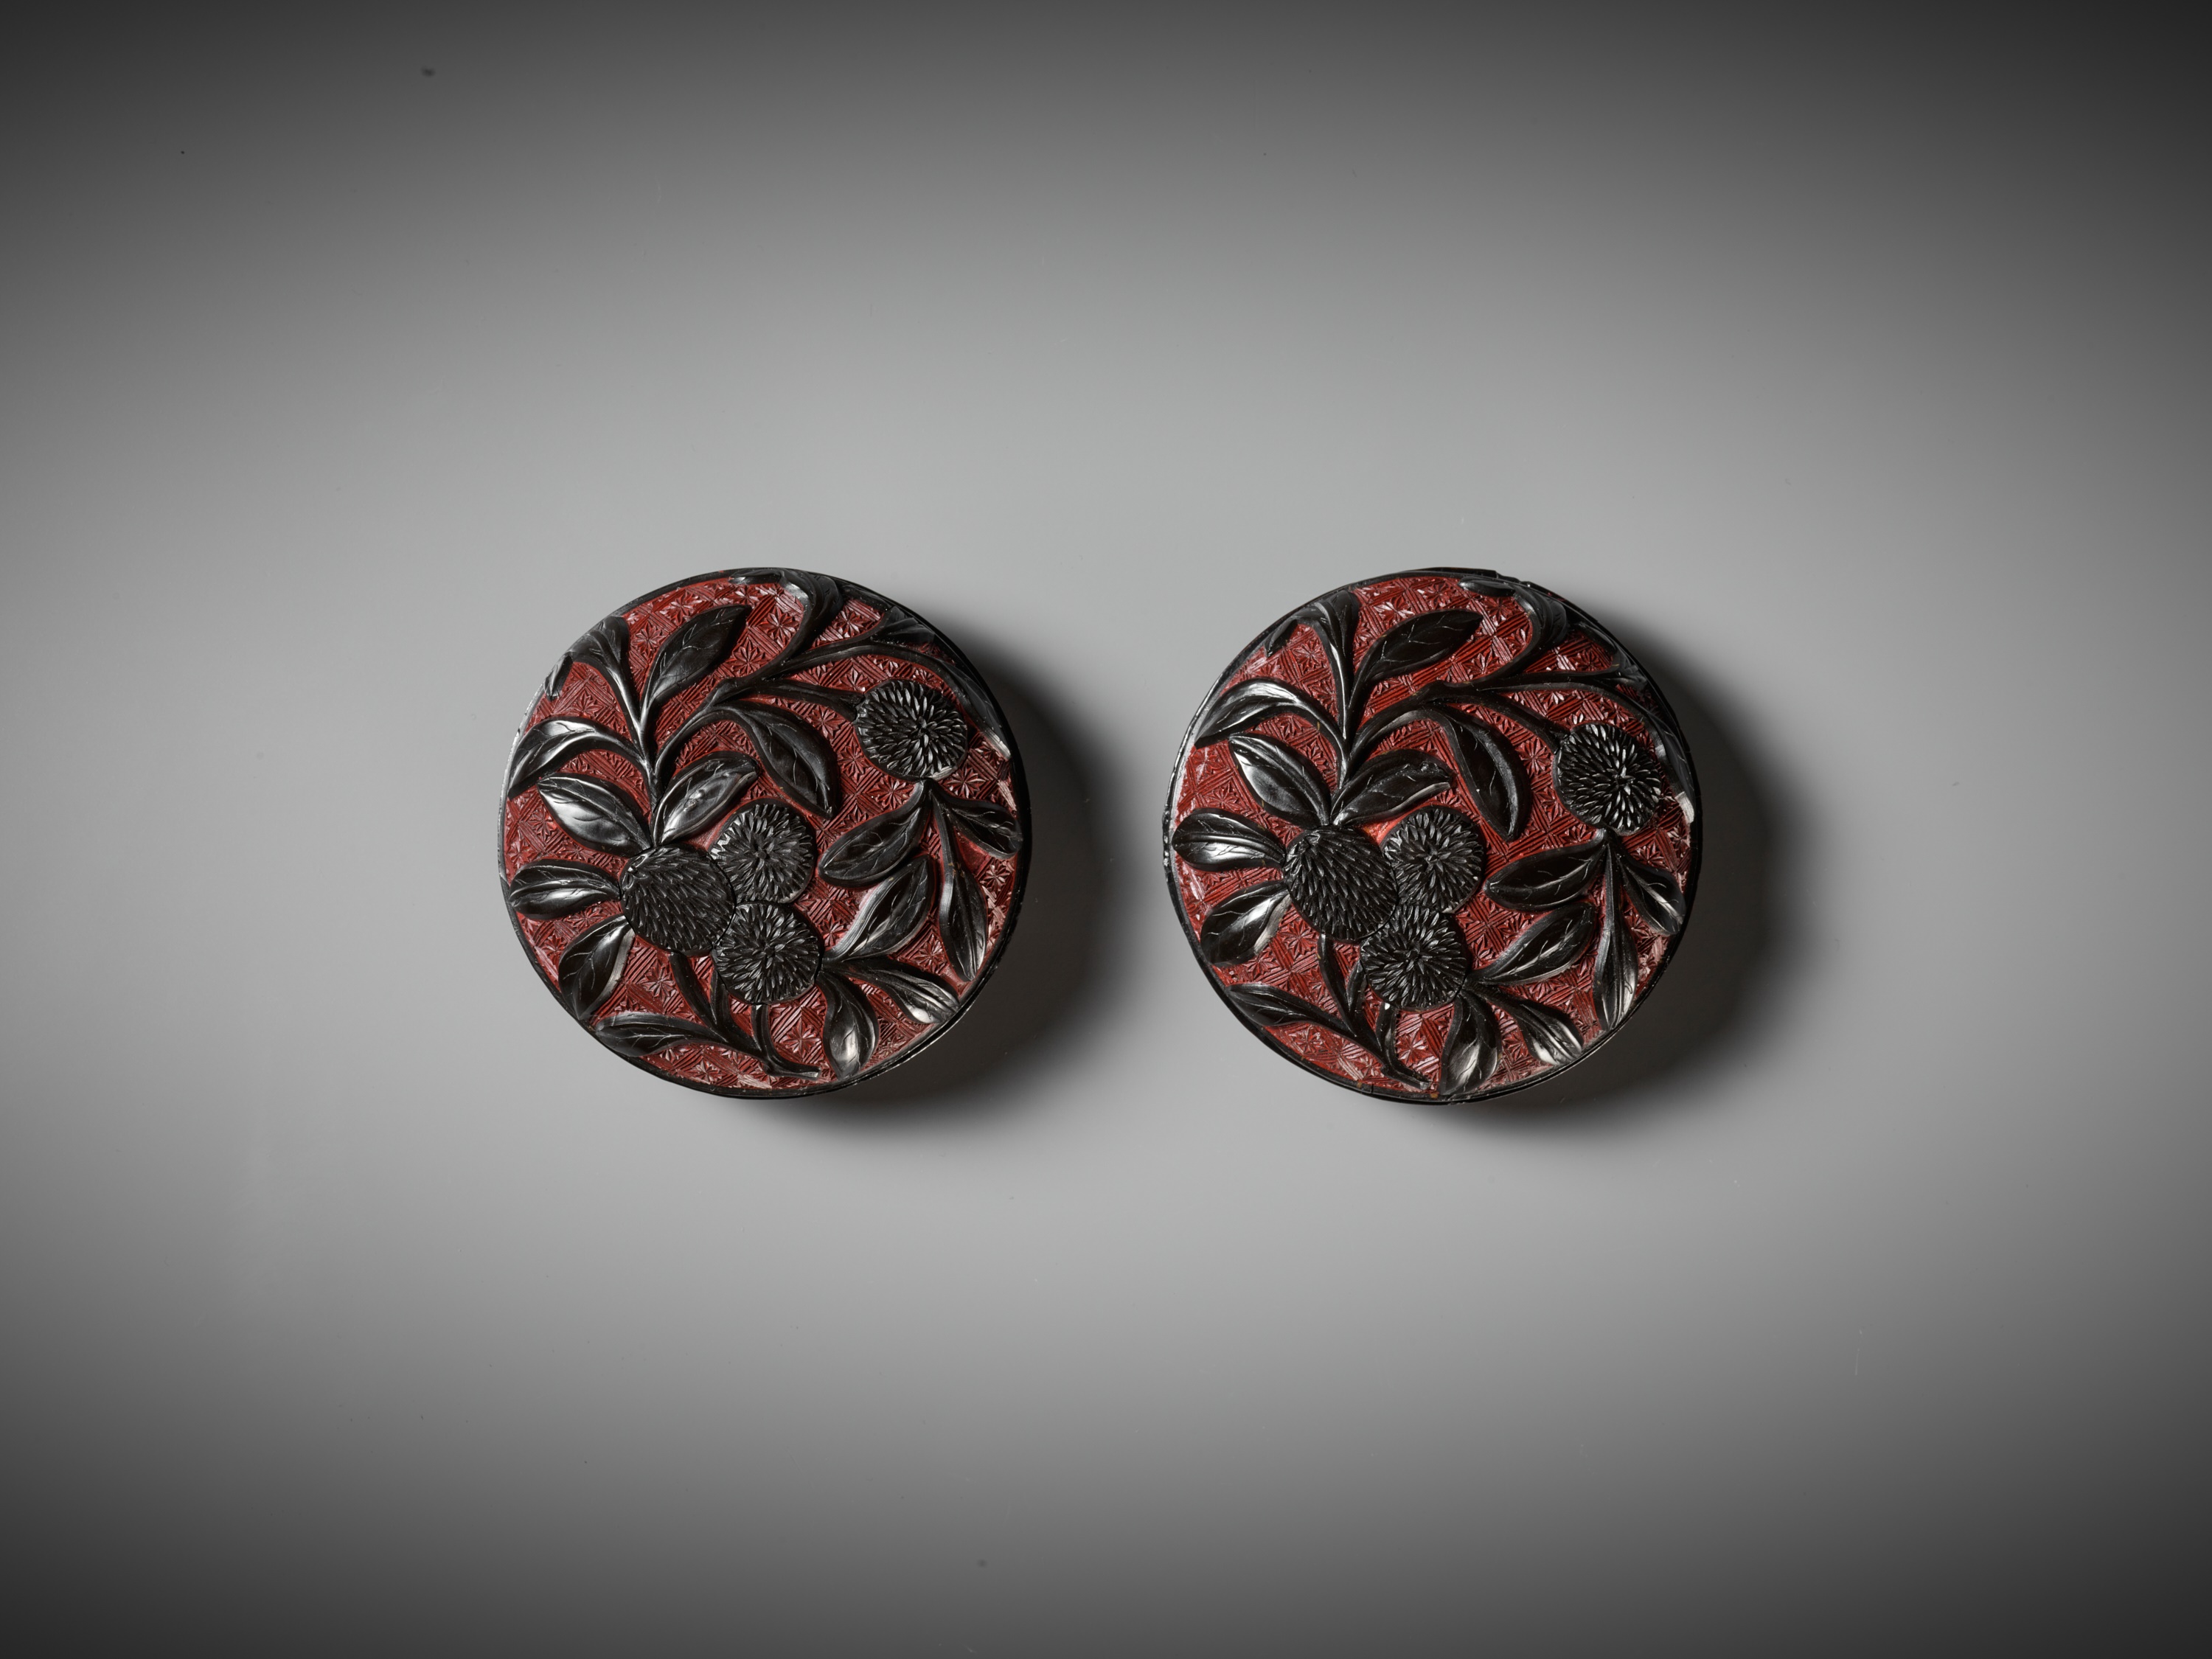 A PAIR OF RED AND BLACK LACQUER 'LYCHEE' BOXES AND COVERS, MING DYNASTY - Image 2 of 11